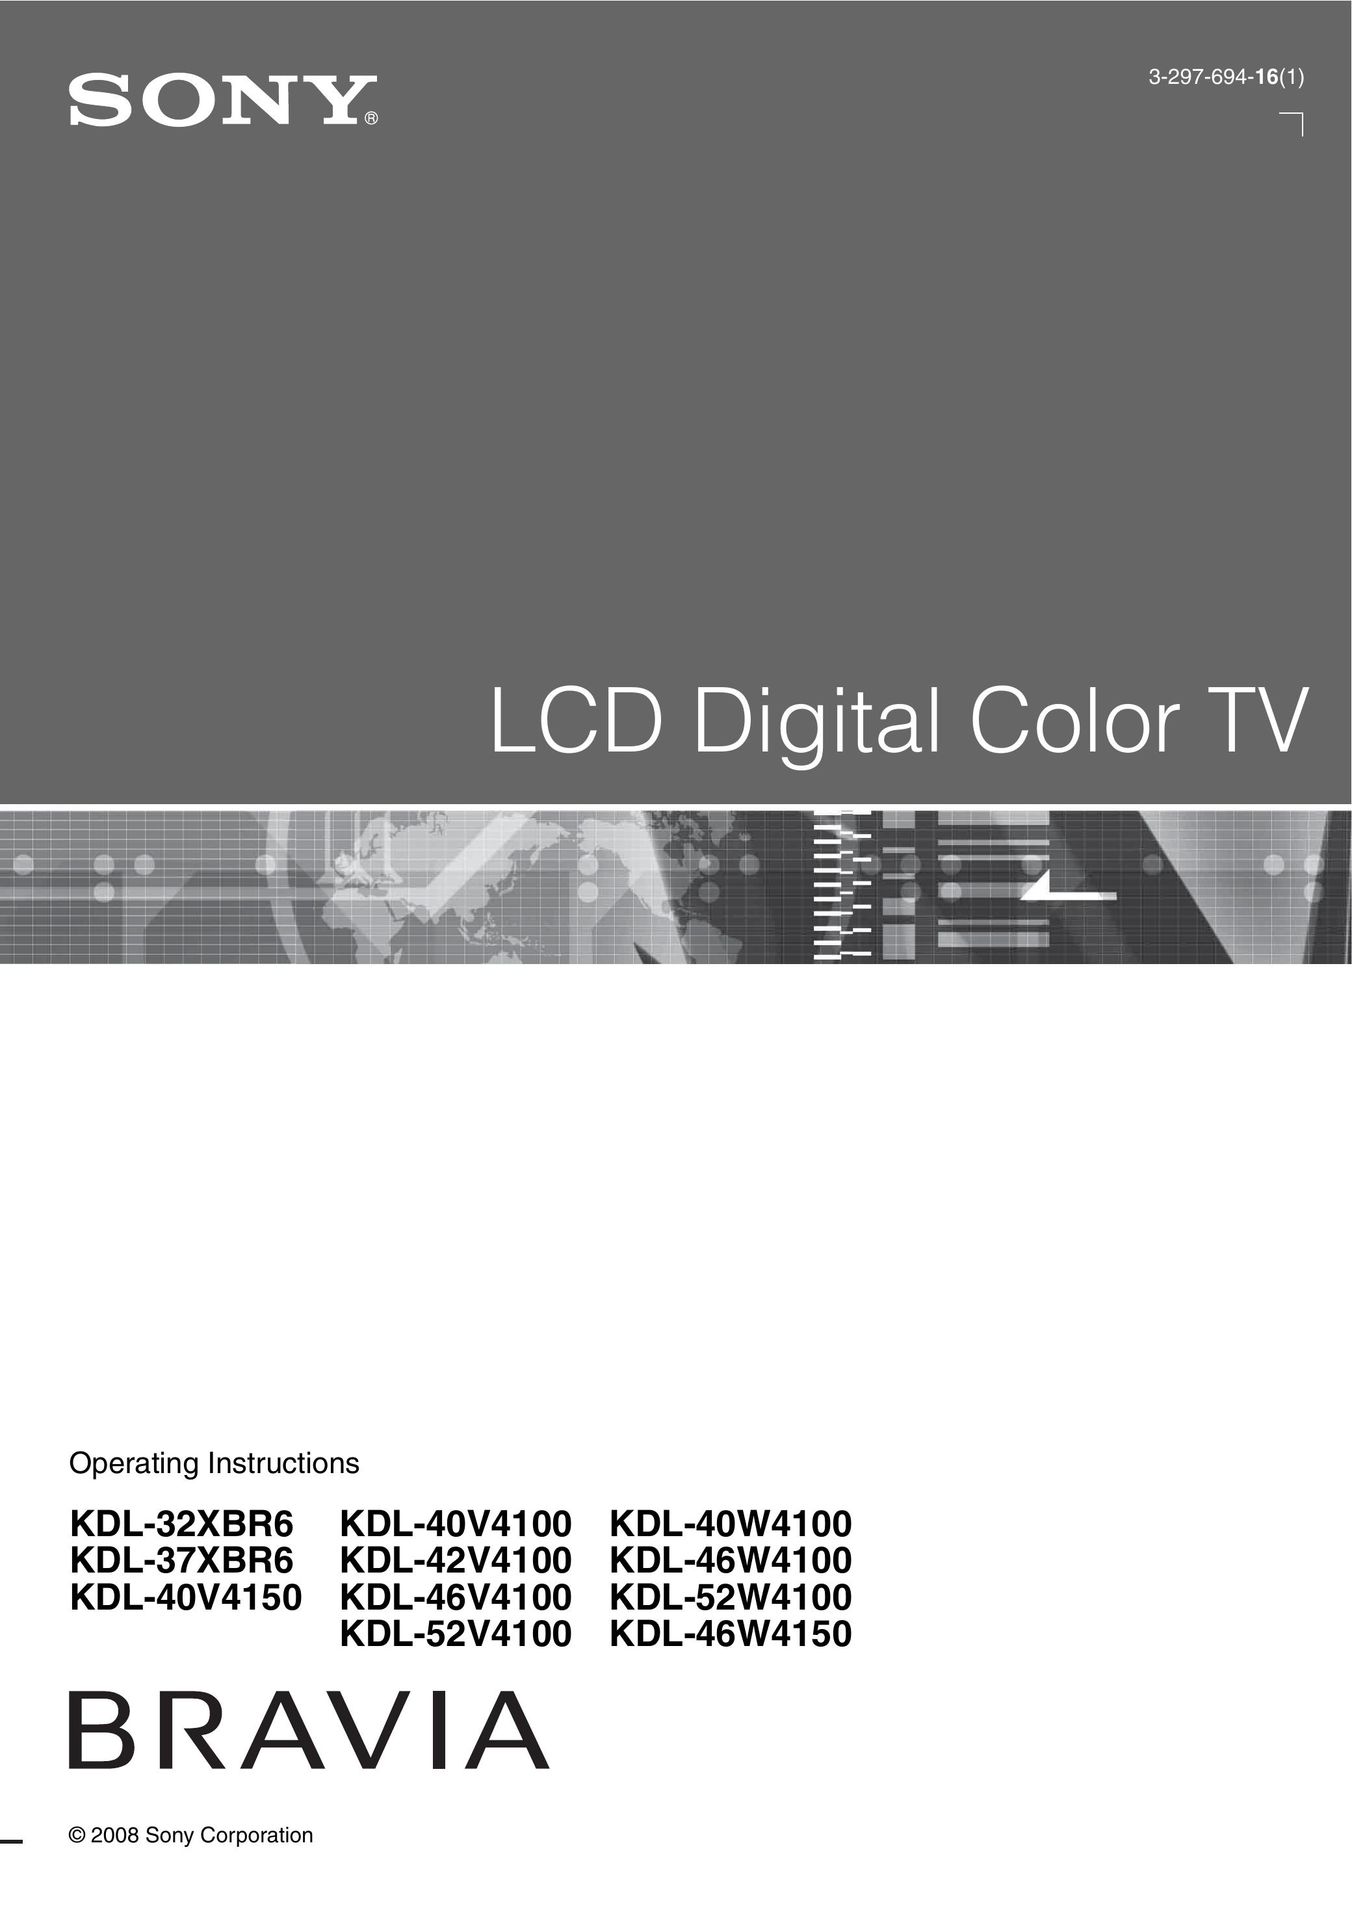 Sony 3-297-694-16(1) Flat Panel Television User Manual